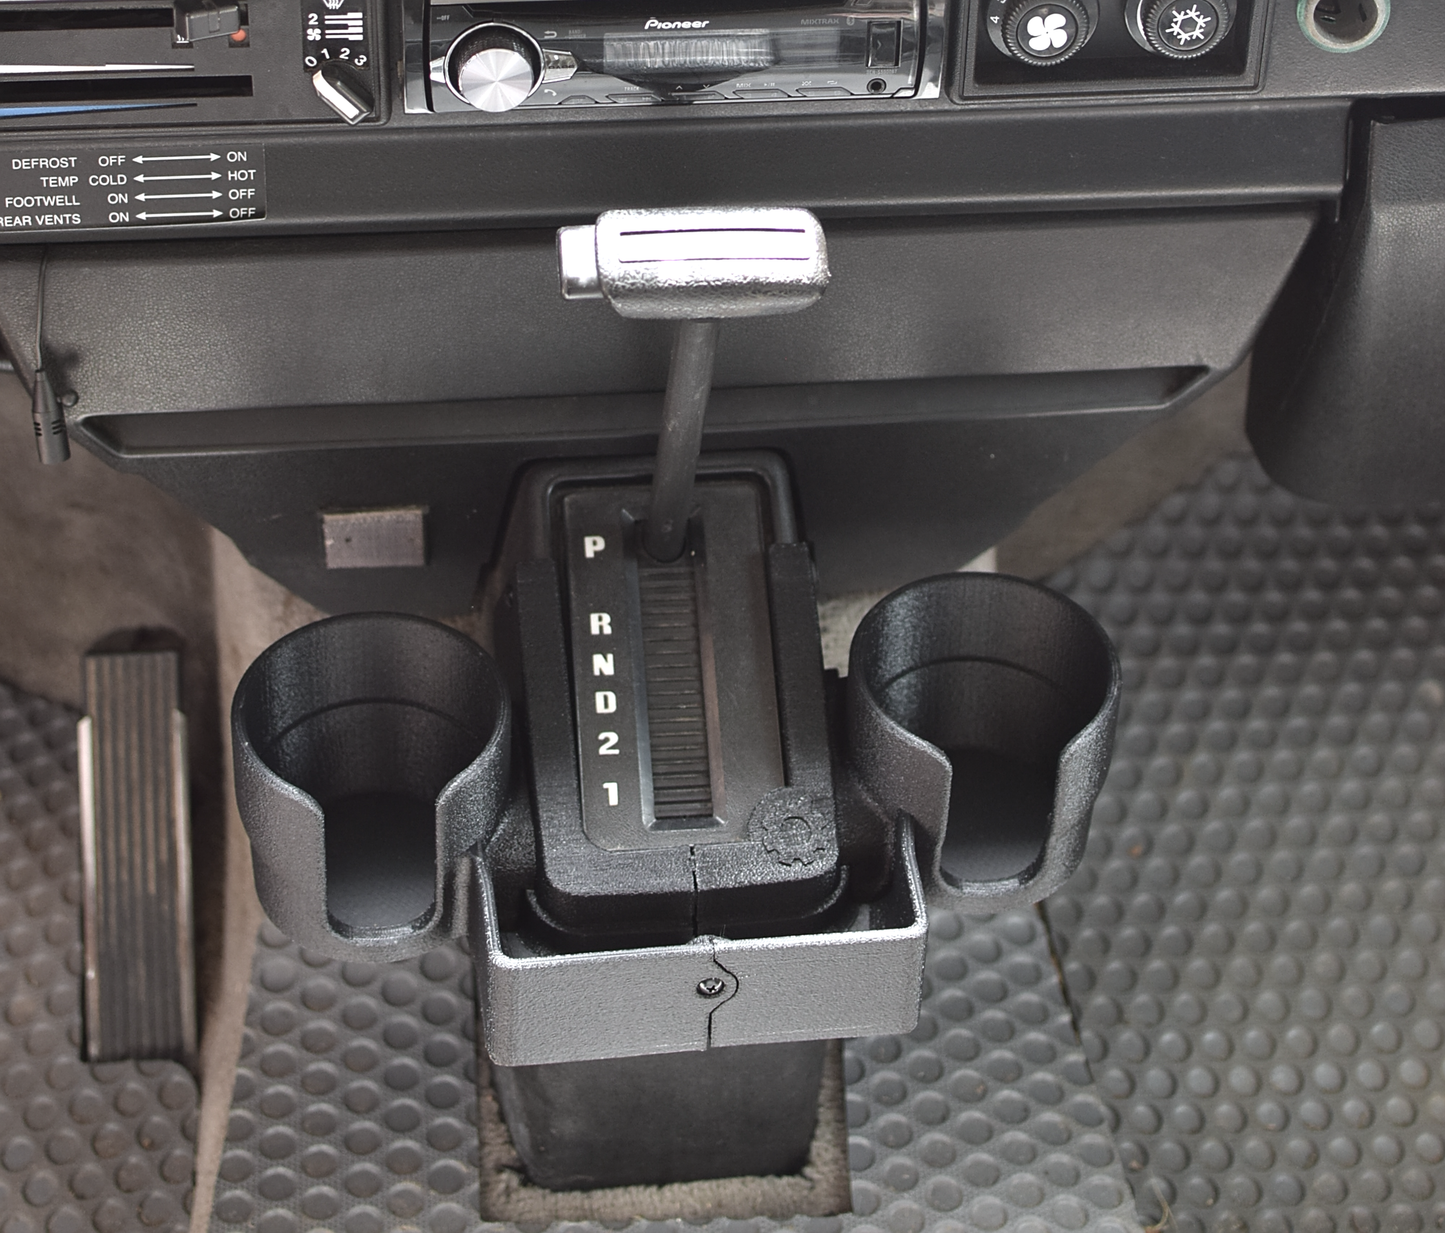 VW Vanagon Cup Holder (Shifter Console)